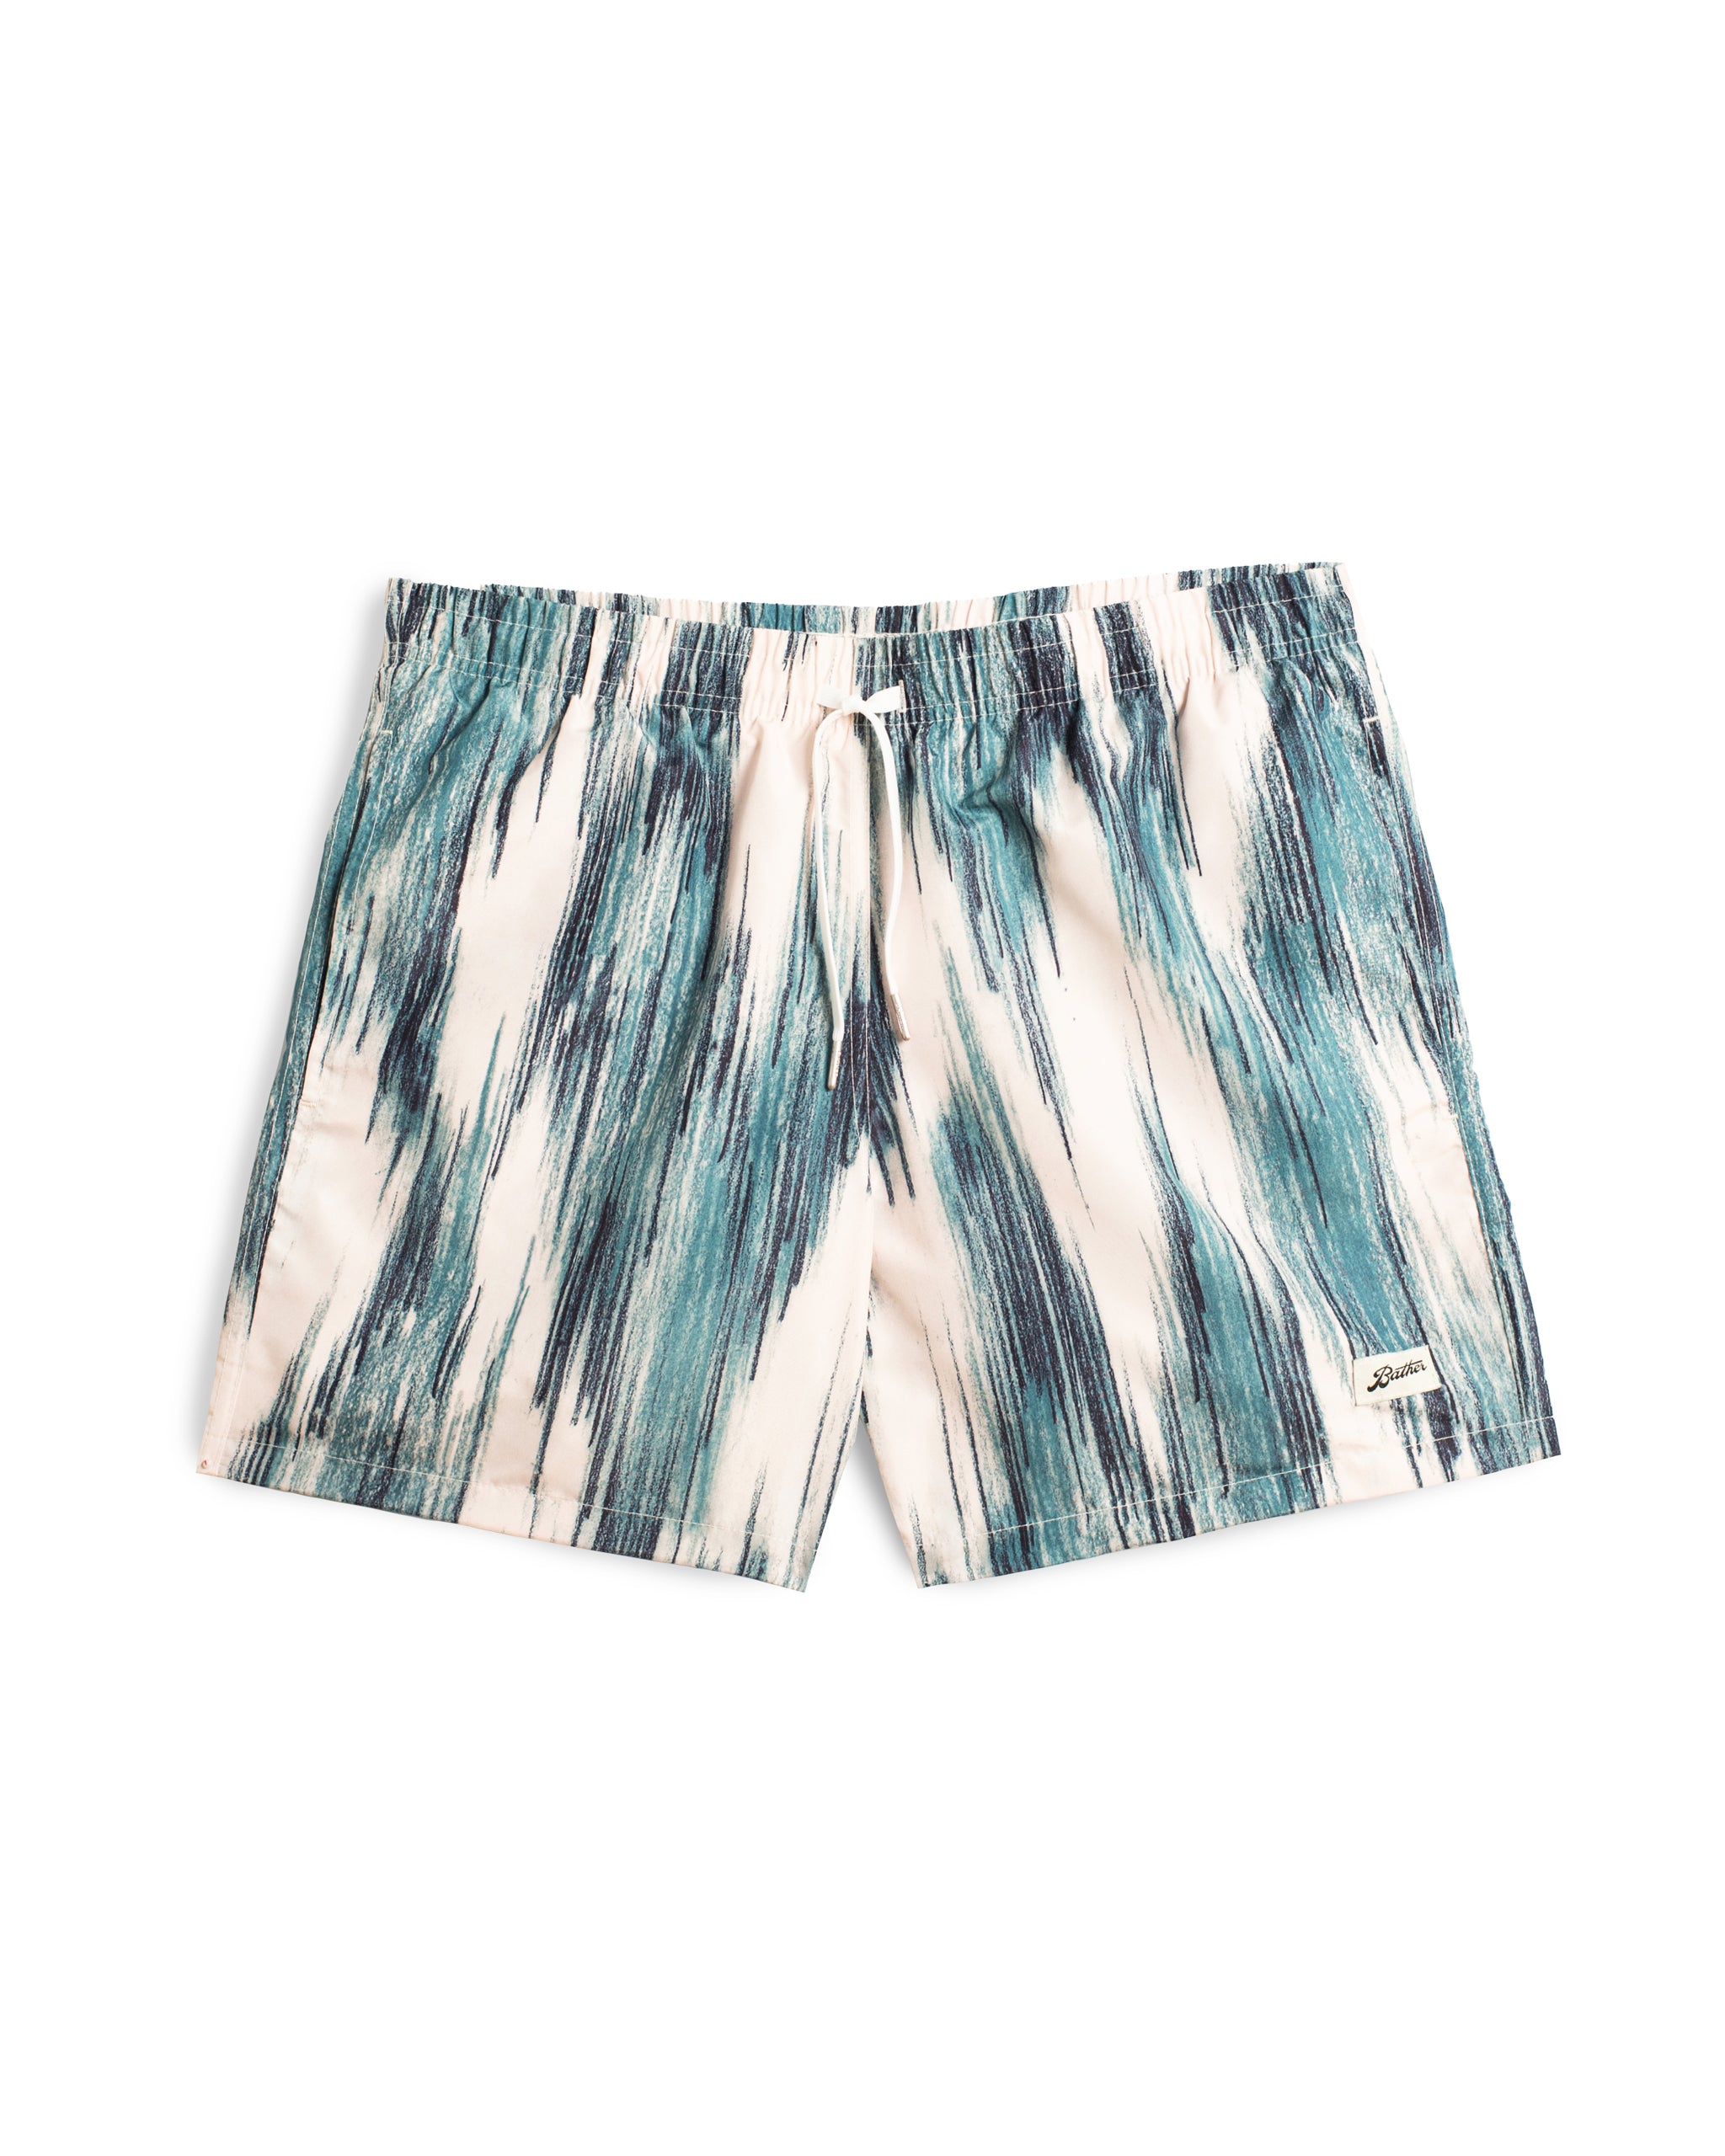 teal and cream Bather swim trunk with color contrasting pattern